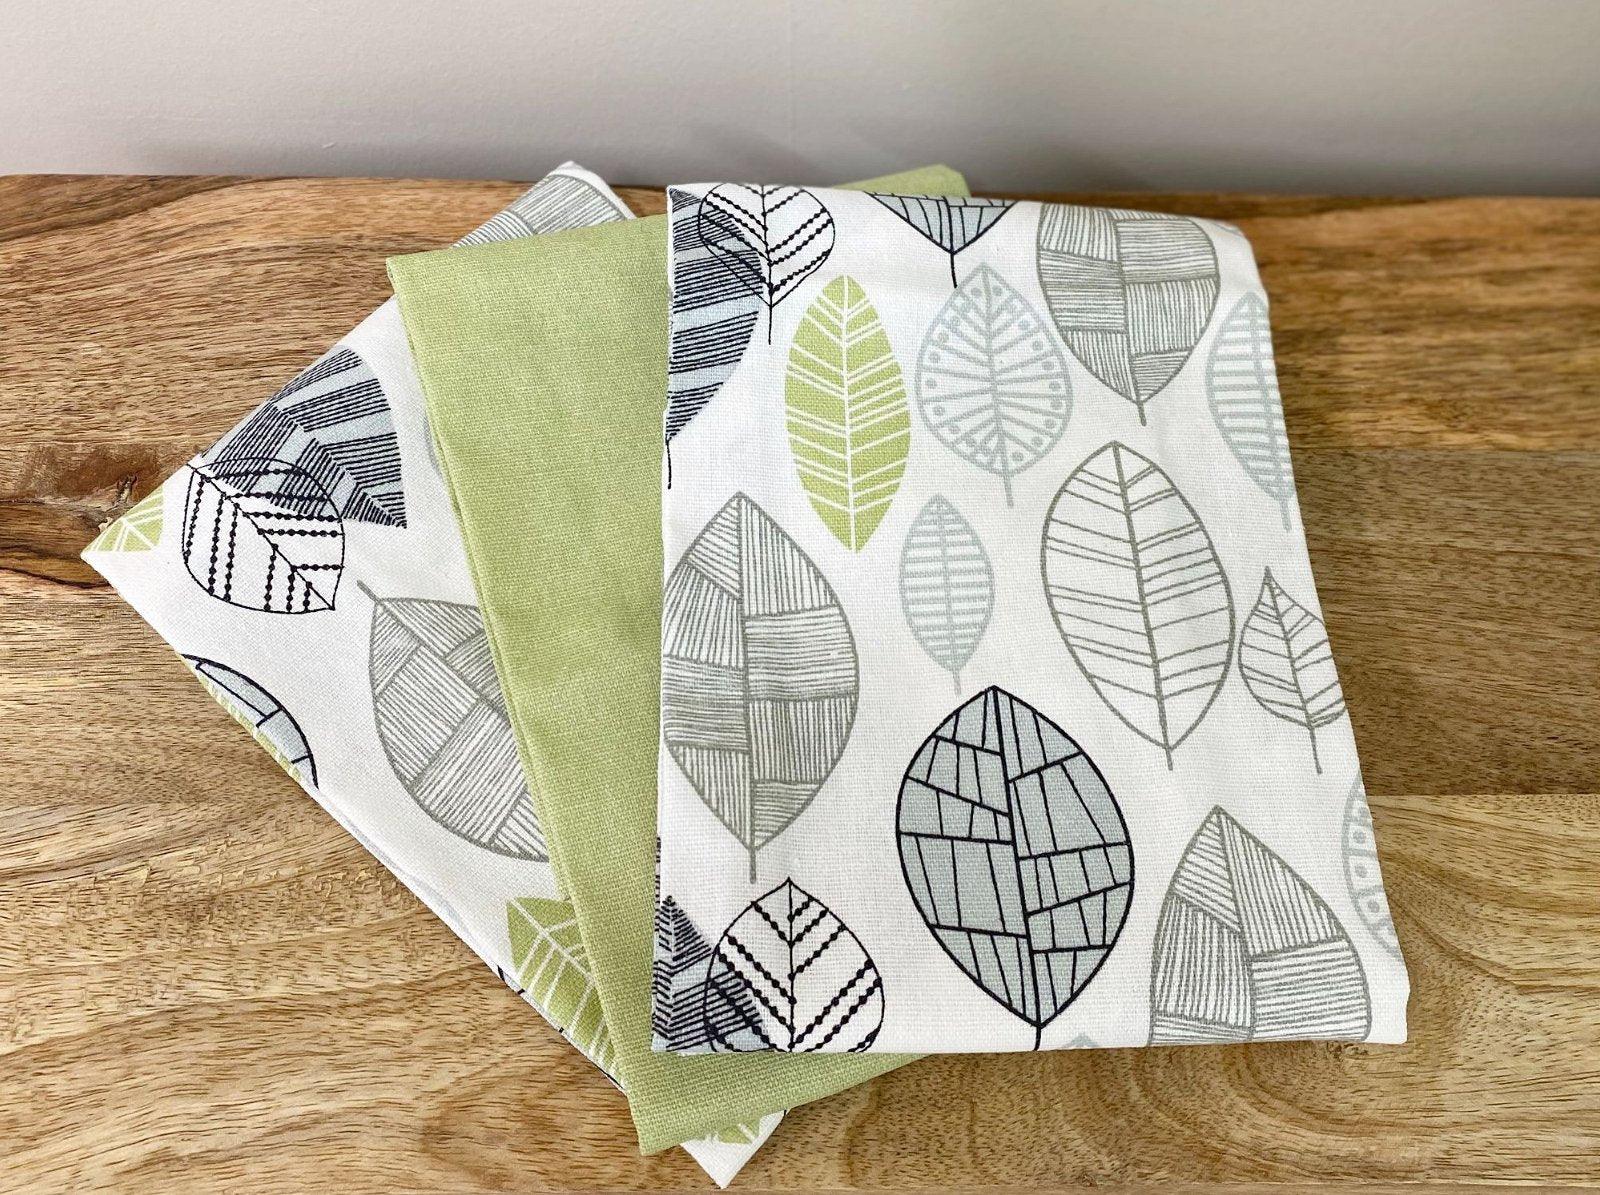 View Pack of 3 Kitchen Tea Towels With Contemporary Green Leaf Print Design information